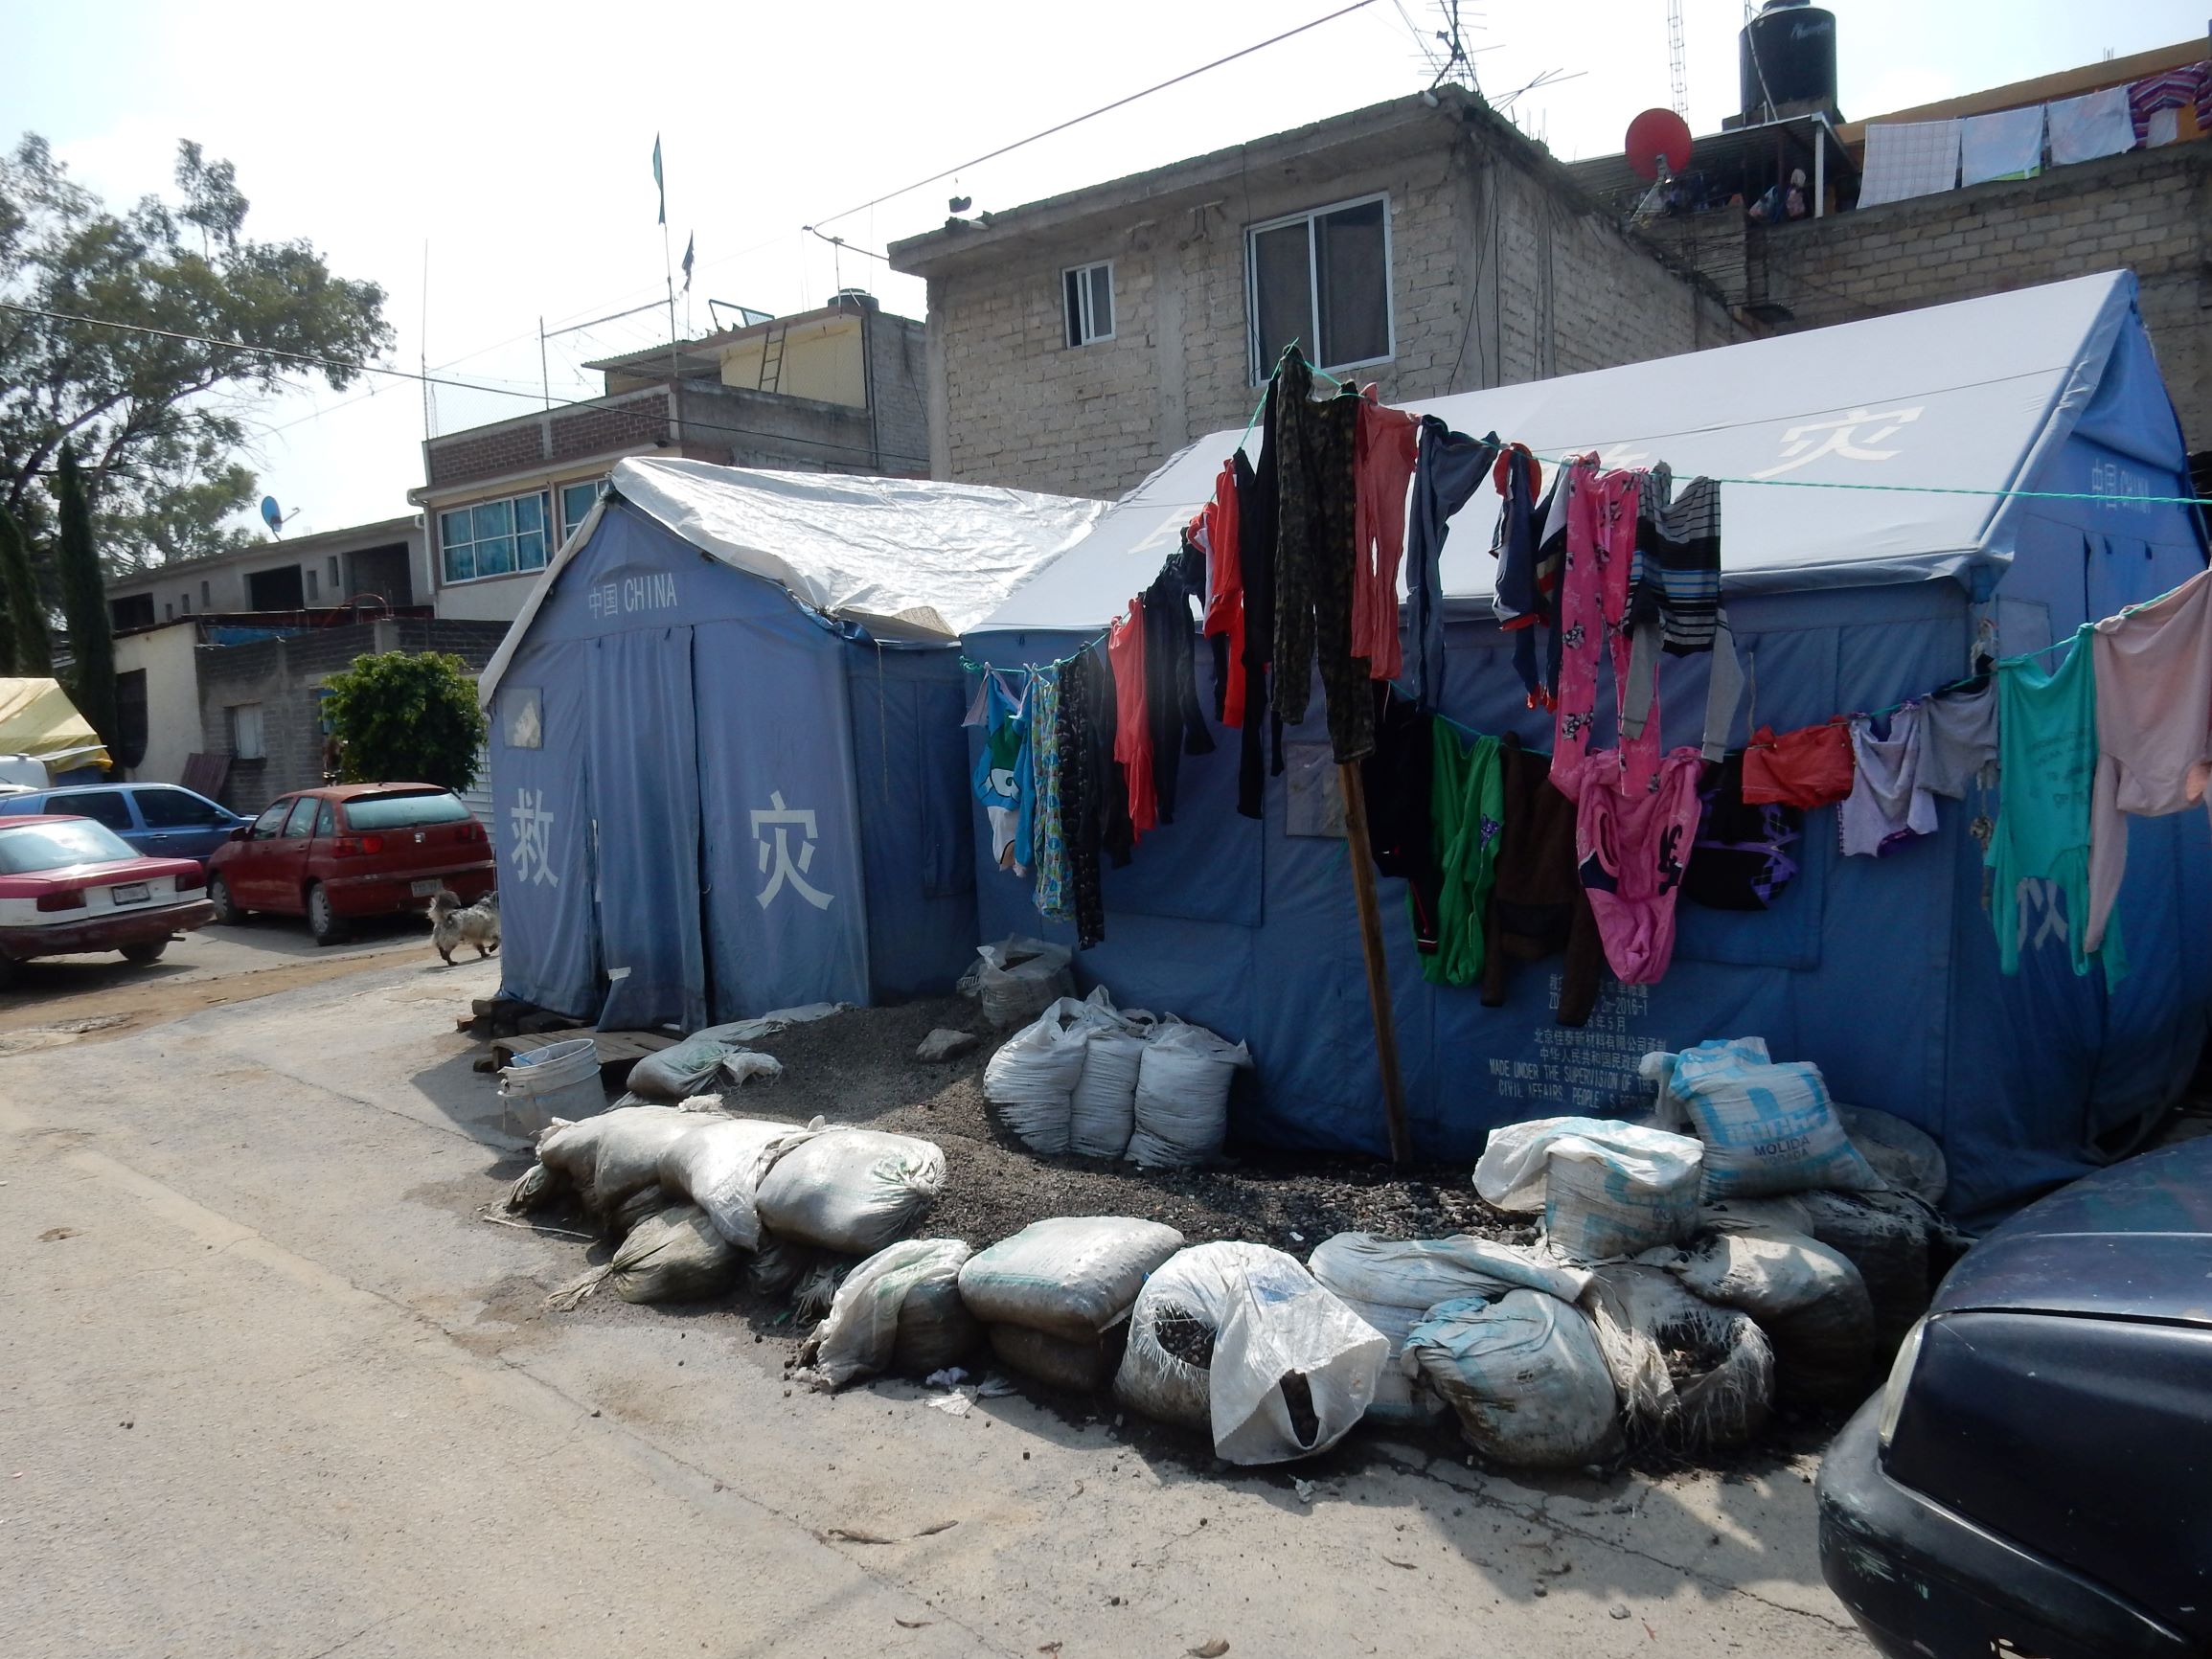 A year after the earthquake, displaced people in Iztapalapa are living in tents at risk of flooding and disease